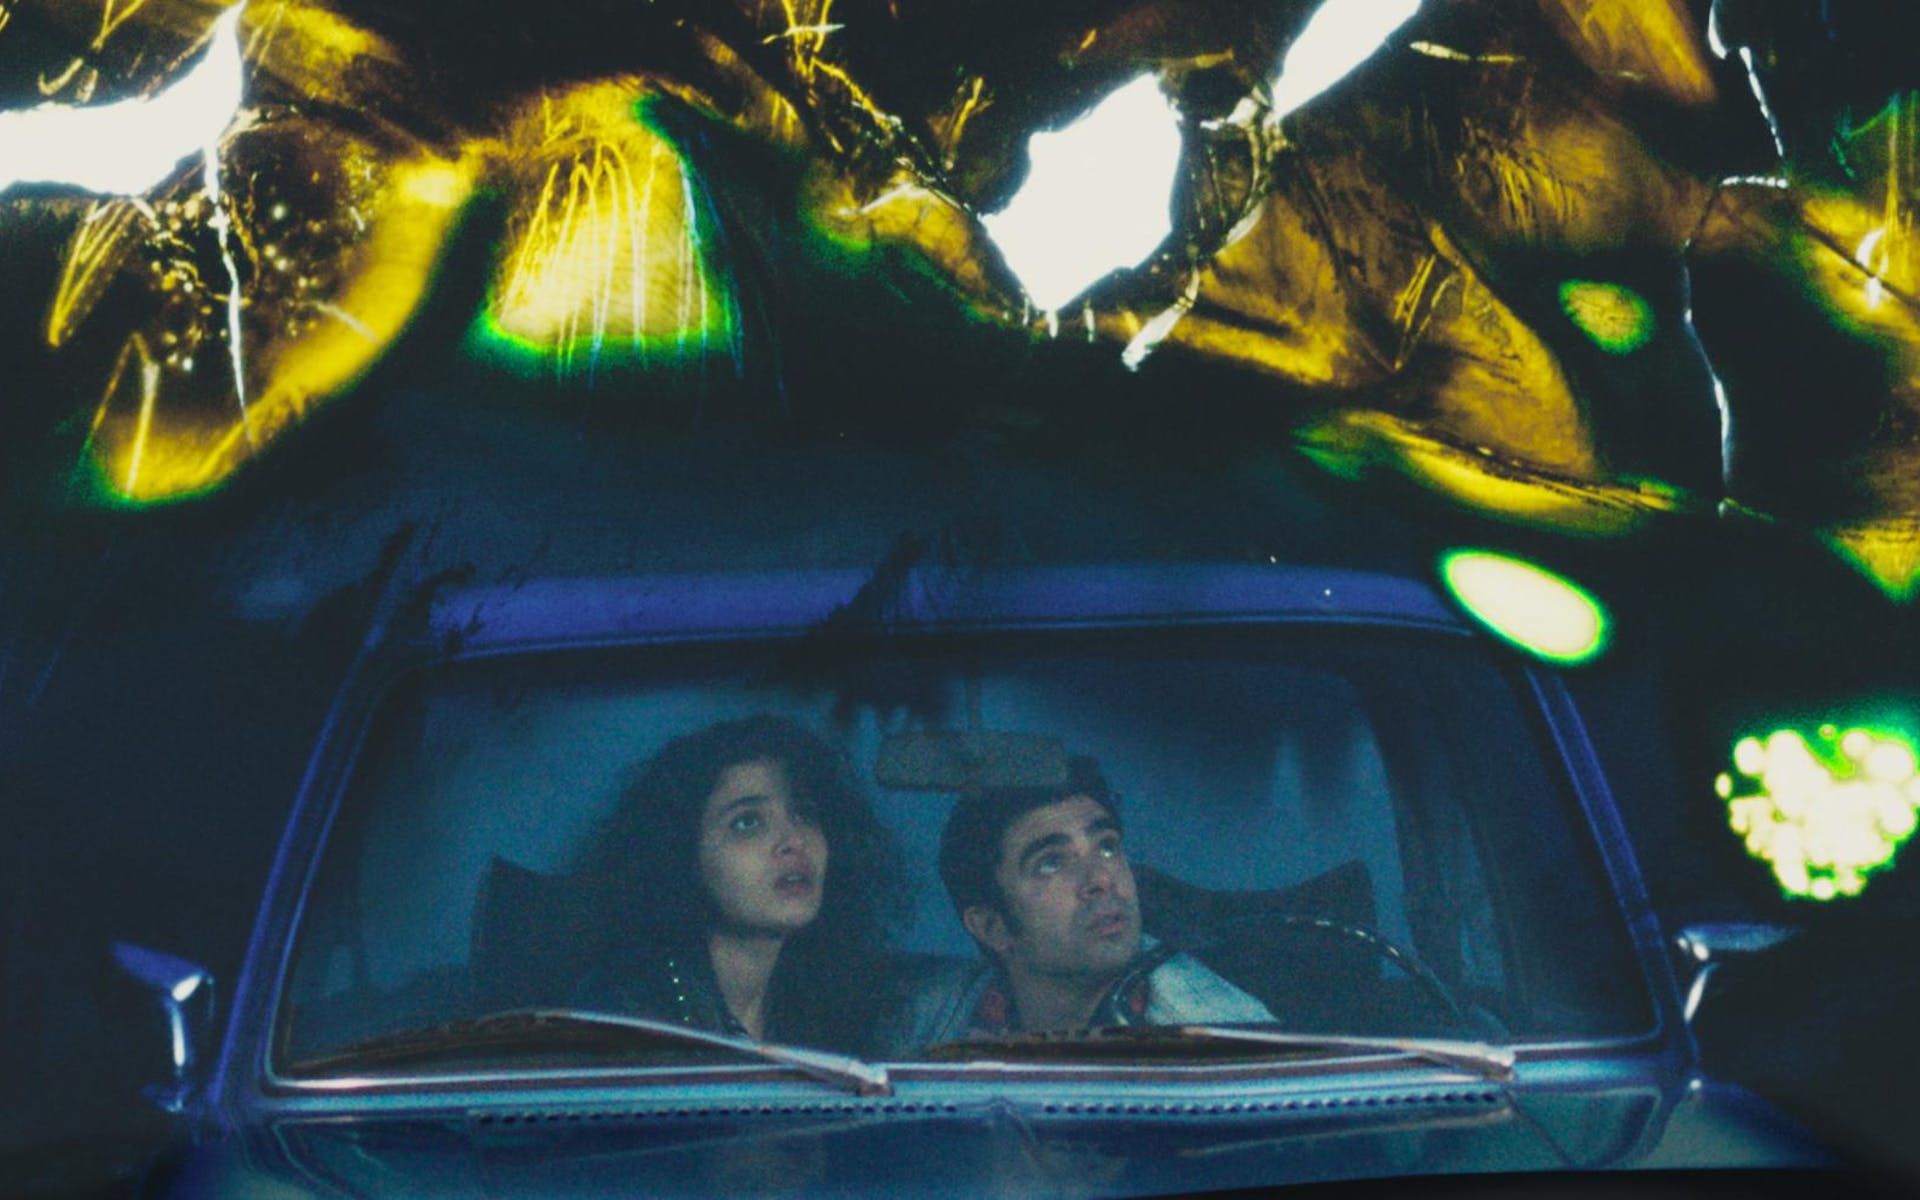 A man and a woman sit a car and look up at strange lights in the sky.